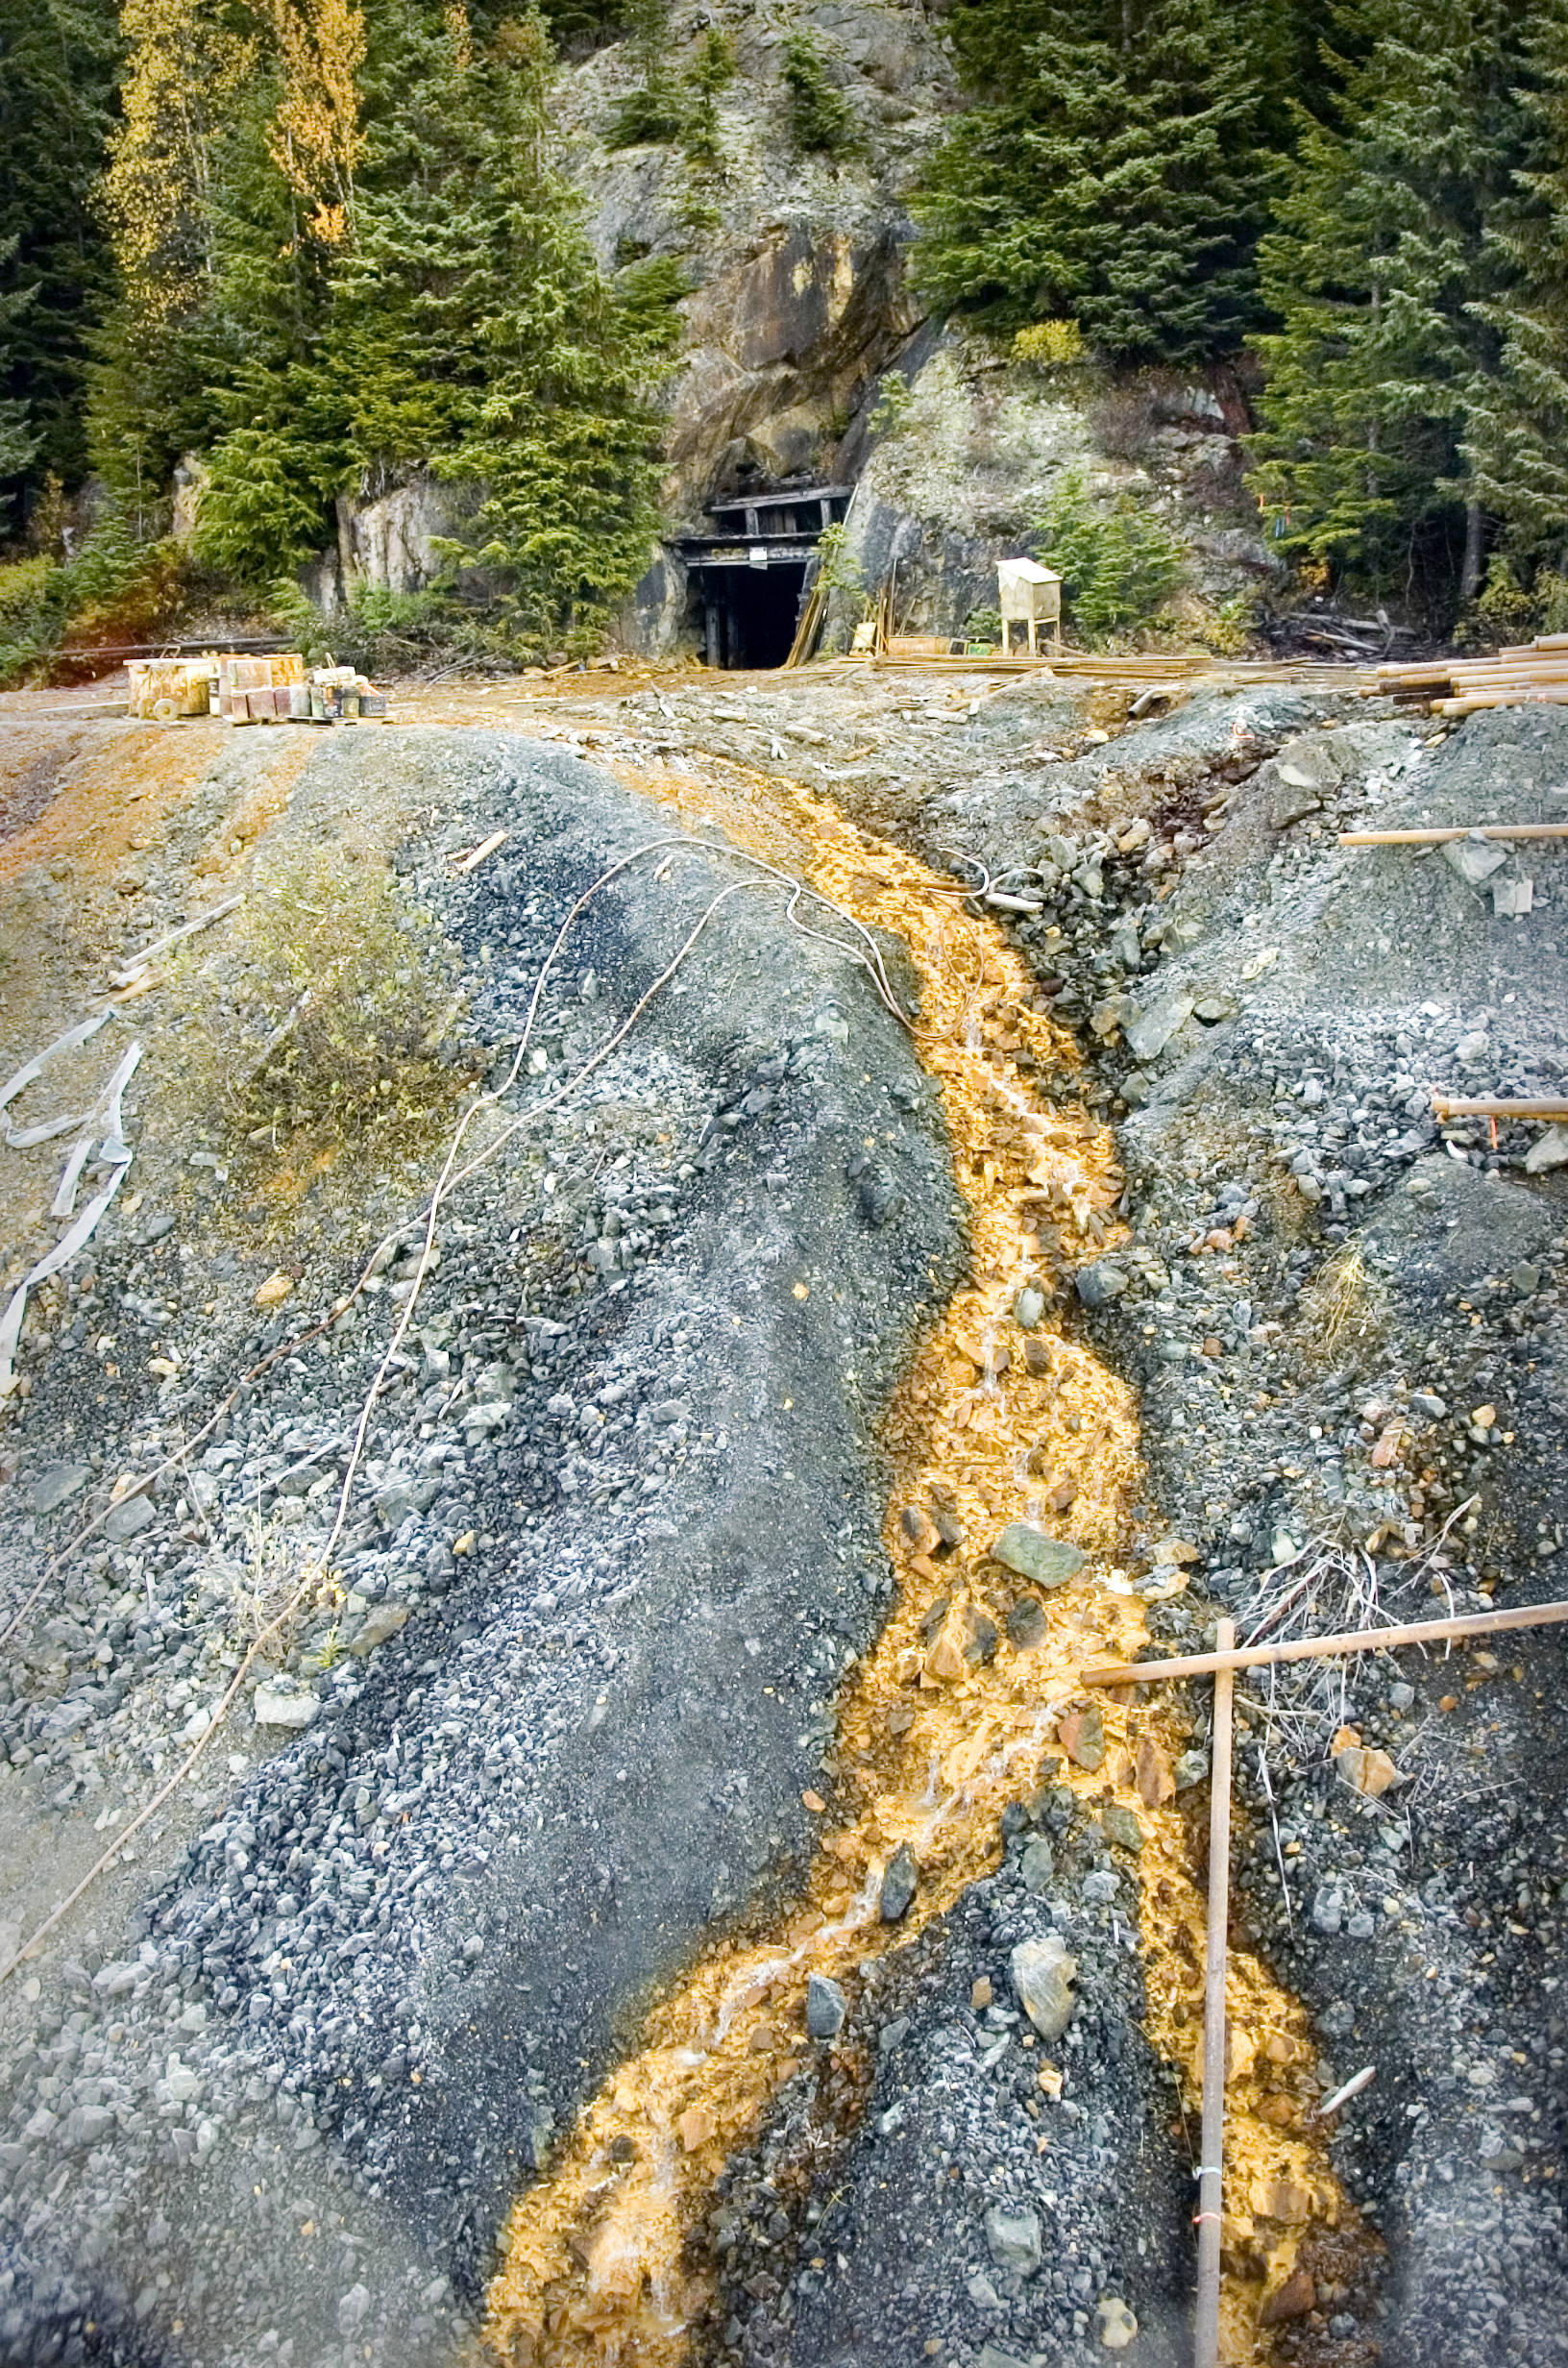 Acid contaminated water runs from the entrance of the Tulsequah Chief Mine in Canada in October 2018. Eight U.S. senators sent a letter Thursday to British Columbia, Canada’s premier asking for more transboundary water oversight. (Michael Penn | Juneau Empire)